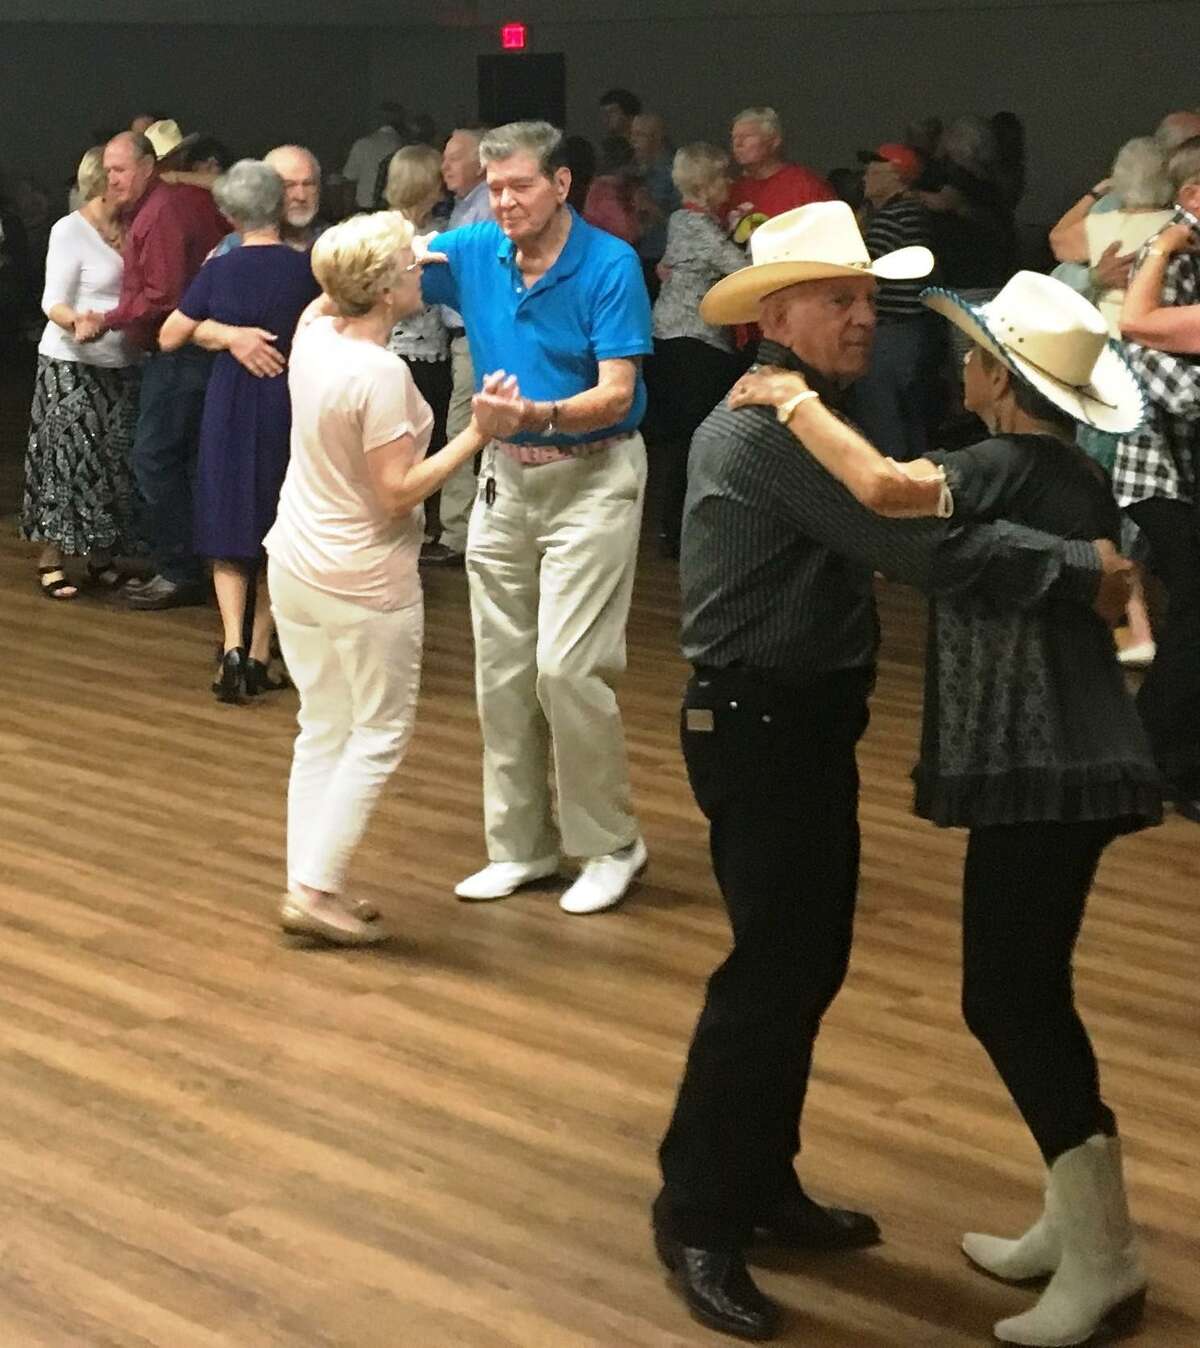 Join the fun at the Senior Dances. Couples and singles are welcome to weekly dances featuring bands from Country & Western to Golden Oldies. Line dances and mixers get everyone involved. Dances are held Friday or Saturday Evenings at the City of Conroe Activity Center, 1204 Candy Cane Lane (formerly Callahan Ave). Cost is $5 per person at the door. Doors open at 6:30 pm, Dance starts at 7 p.m. and end at 10 p.m.